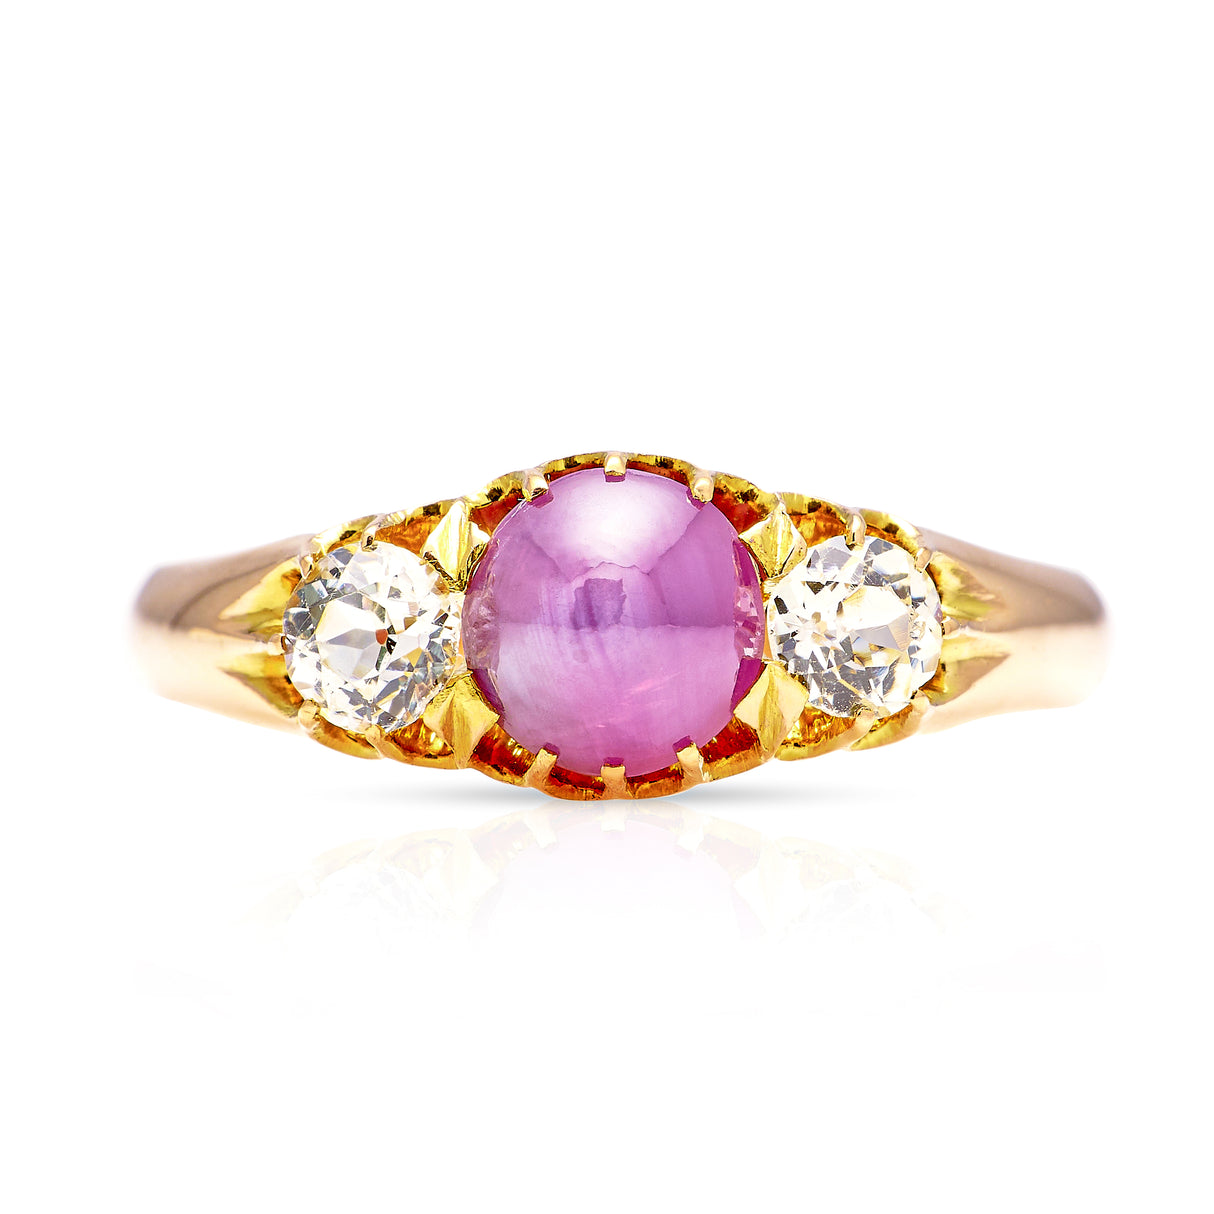 Antique, Edwardian Cabochon Star Ruby and White Sapphire Three-Stone Ring, 15ct Gold